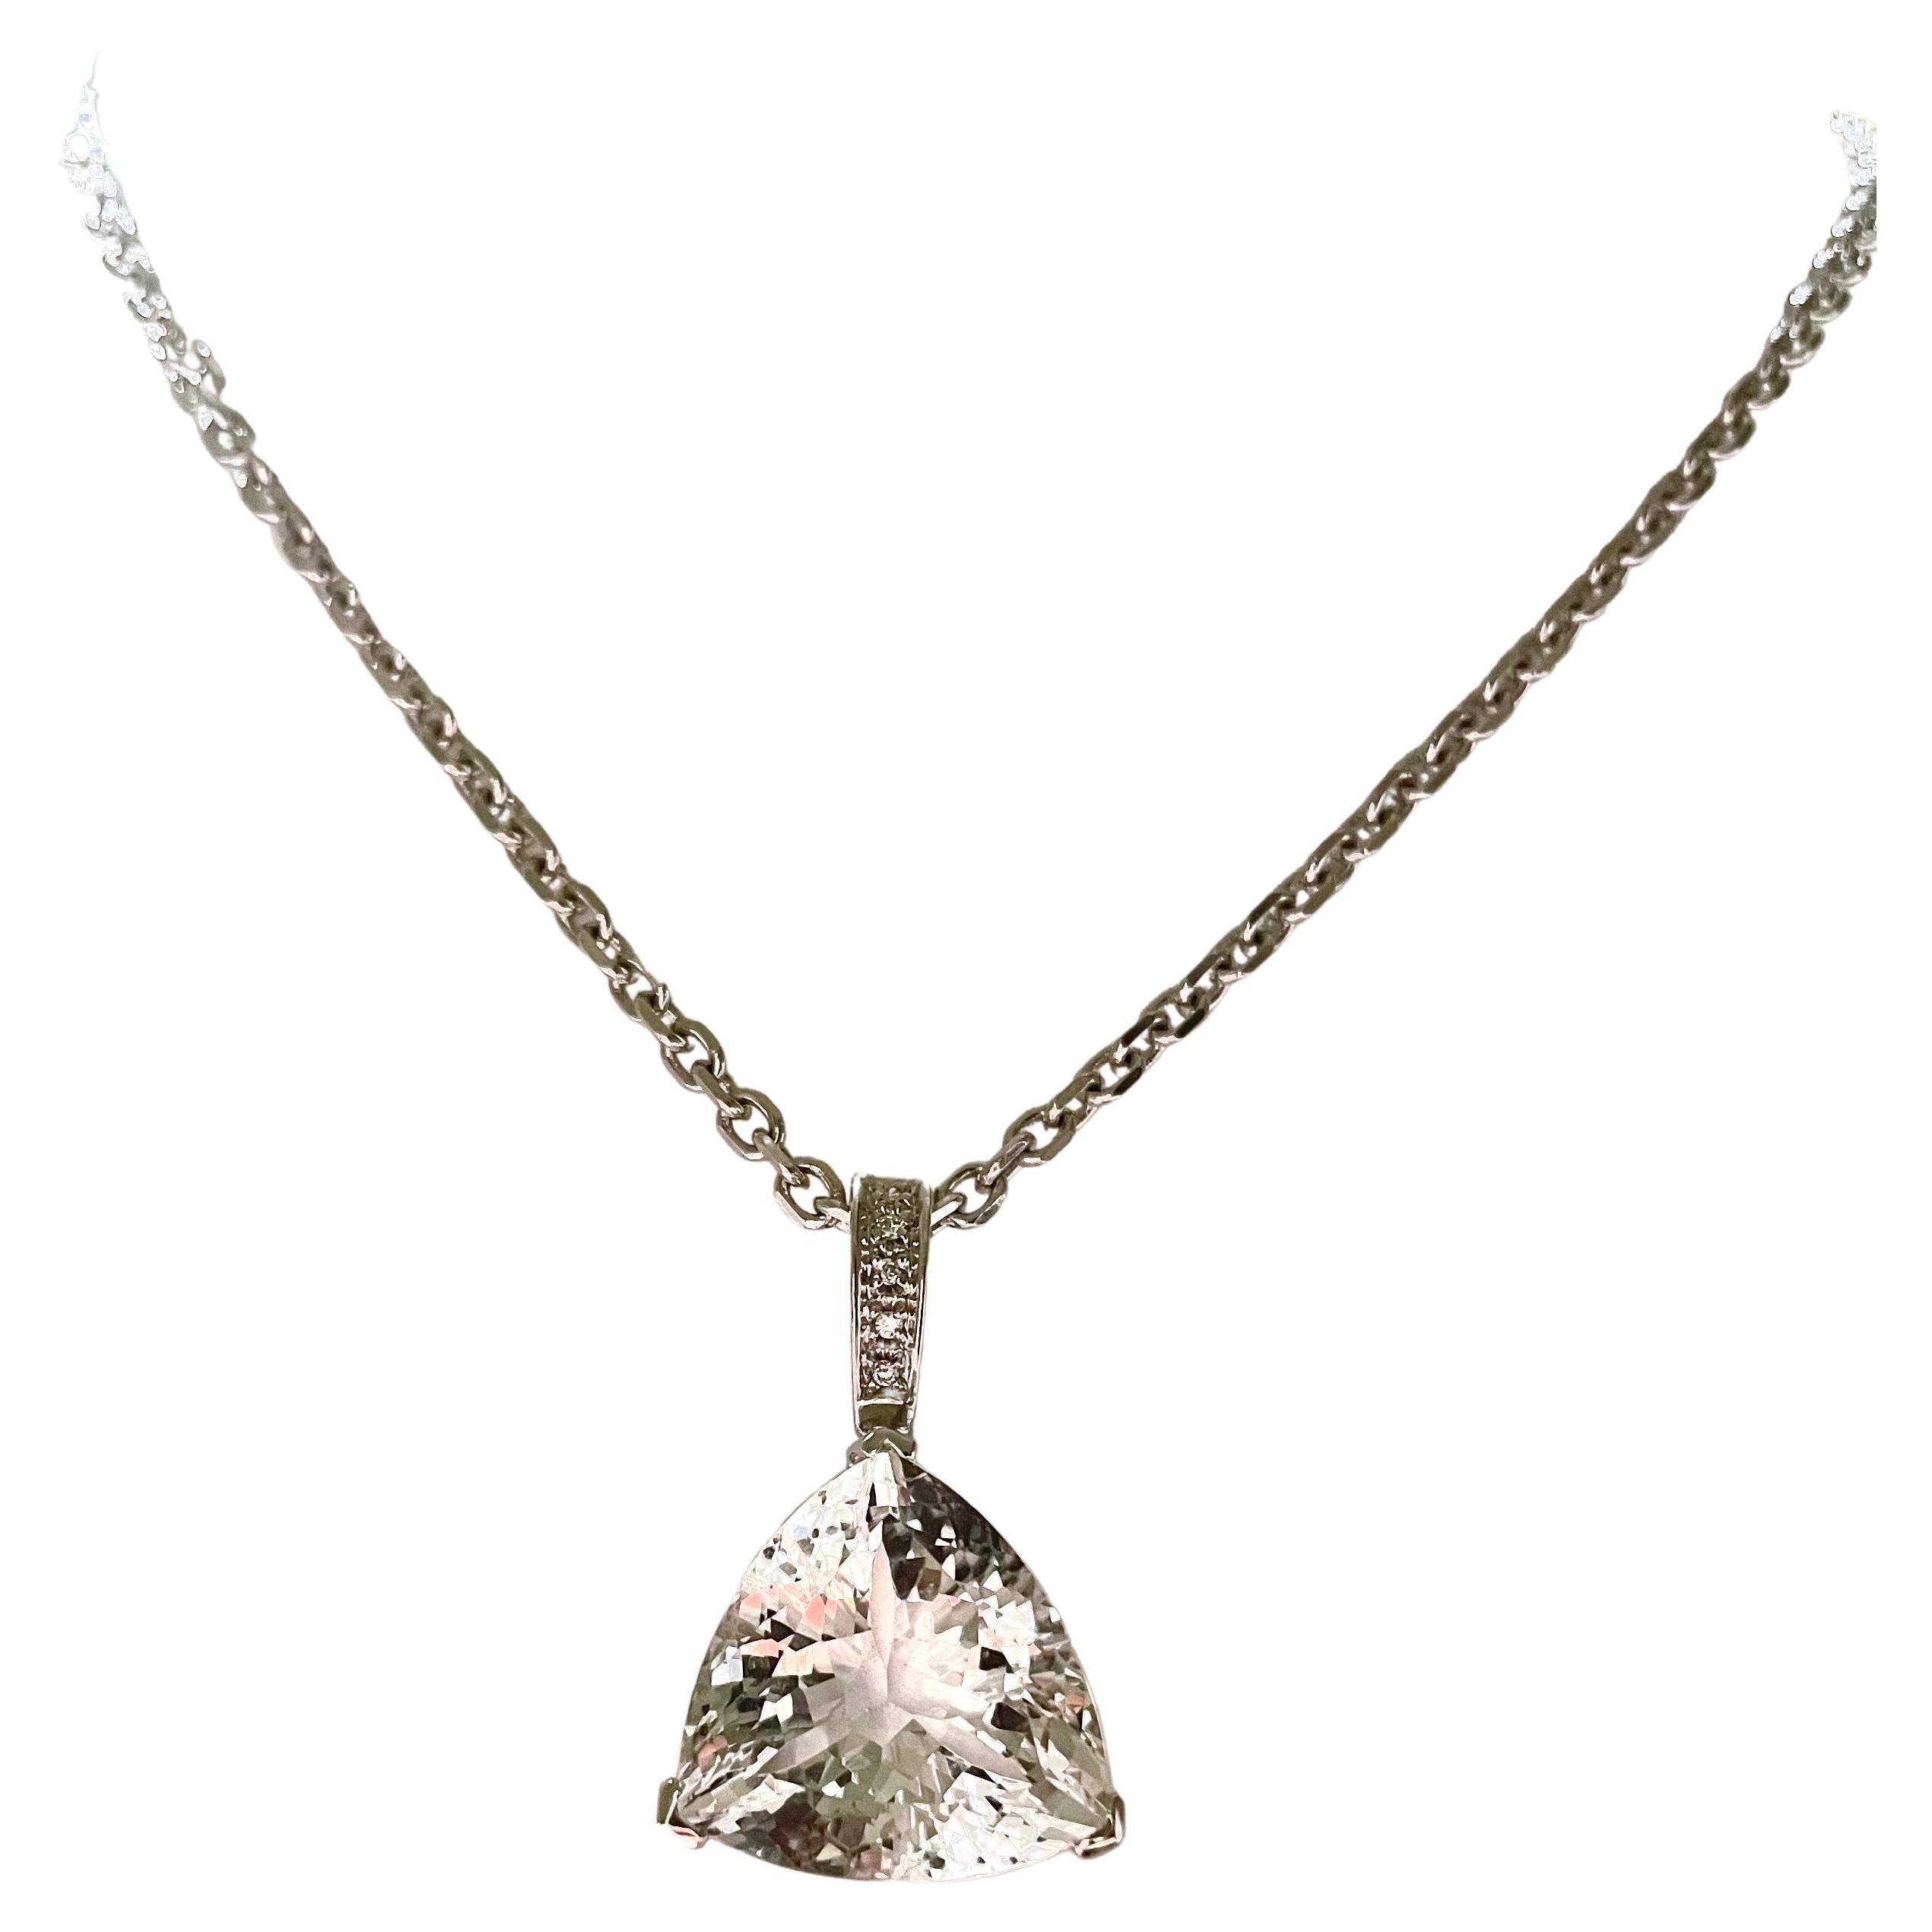 White Topaz 22 Carats Pendant with Pave Diamonds Chain Necklace